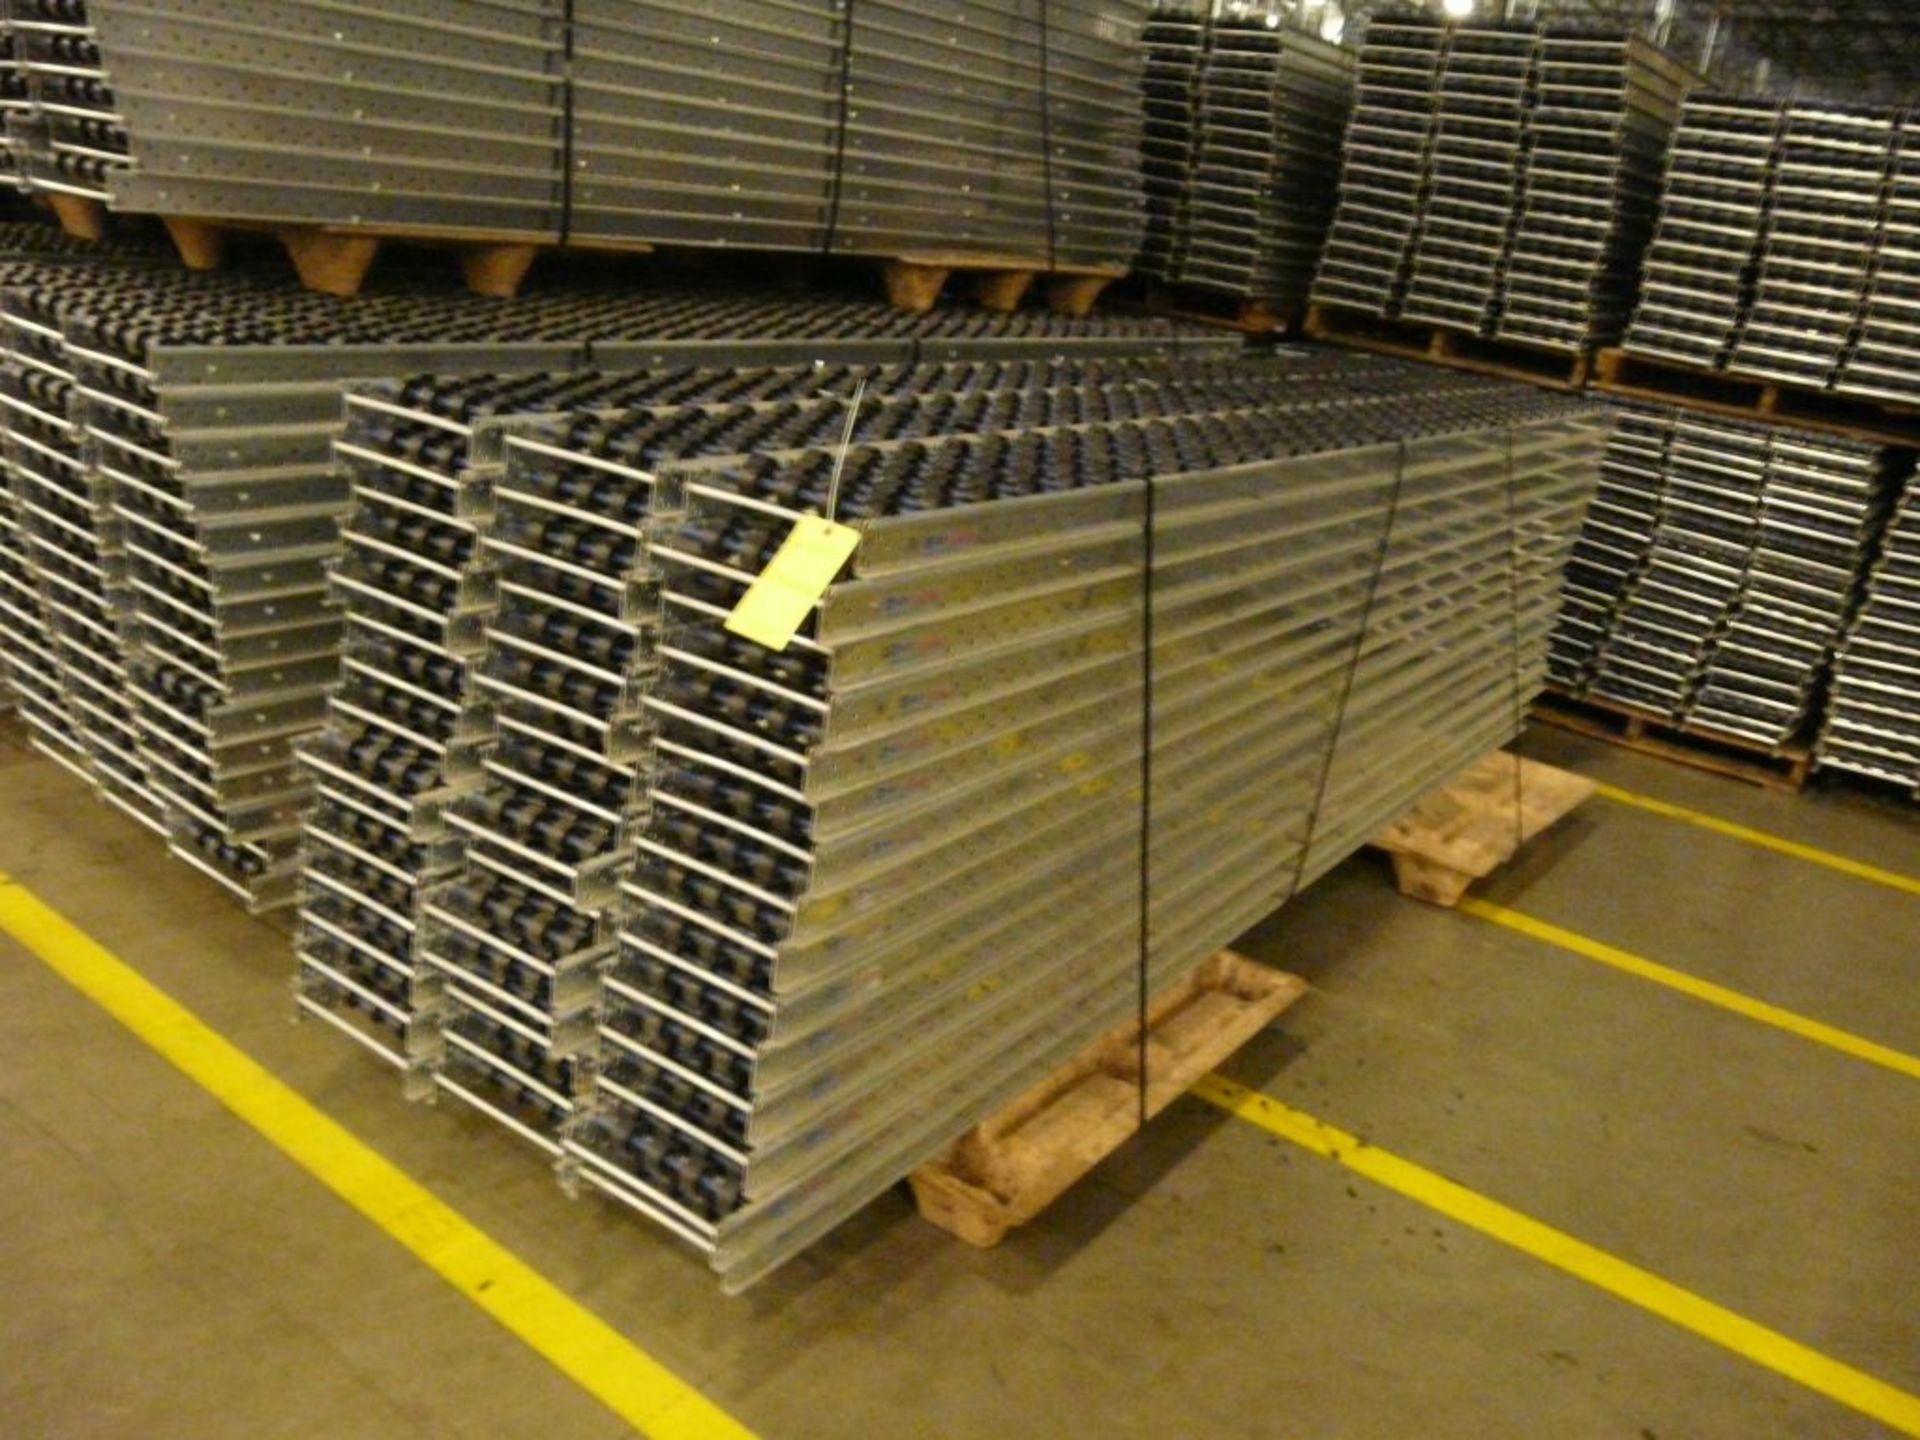 Lot of (90) SpanTrack Wheelbed Carton Flow Conveyors - 11.5'L x 11"W; Tag: 224196 - $30 Lot